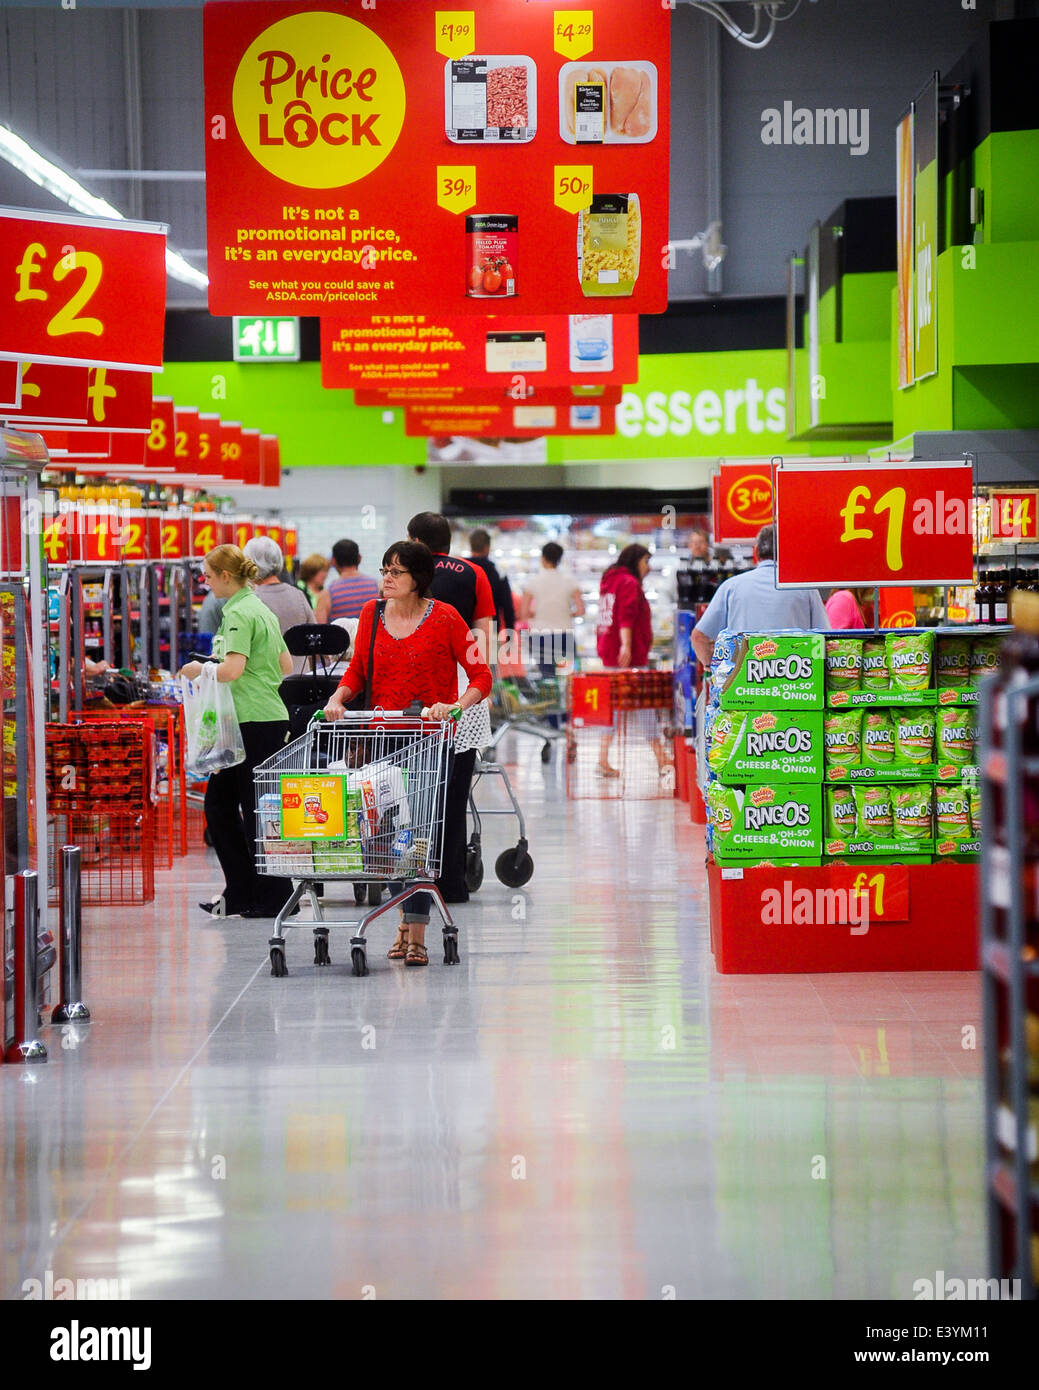 People walking around a supermarket with discount signs in the aisles Stock Photo